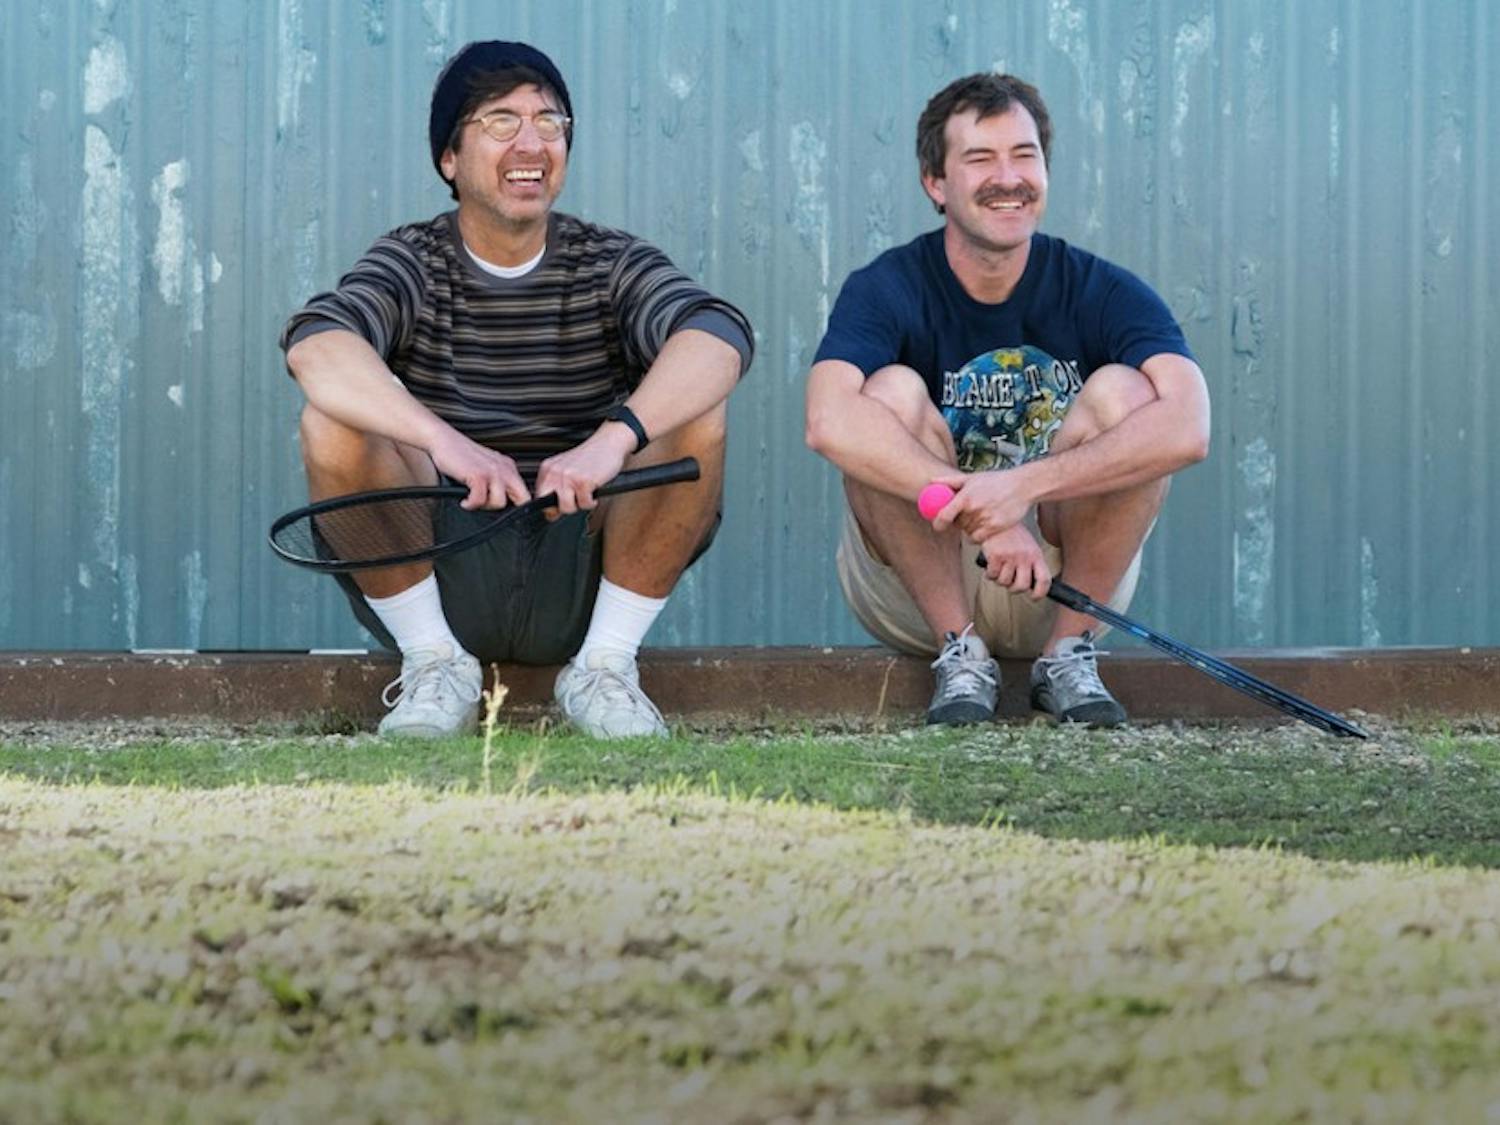 "Paddleton" follows two friends as they confront the fact that one of them is dying. 